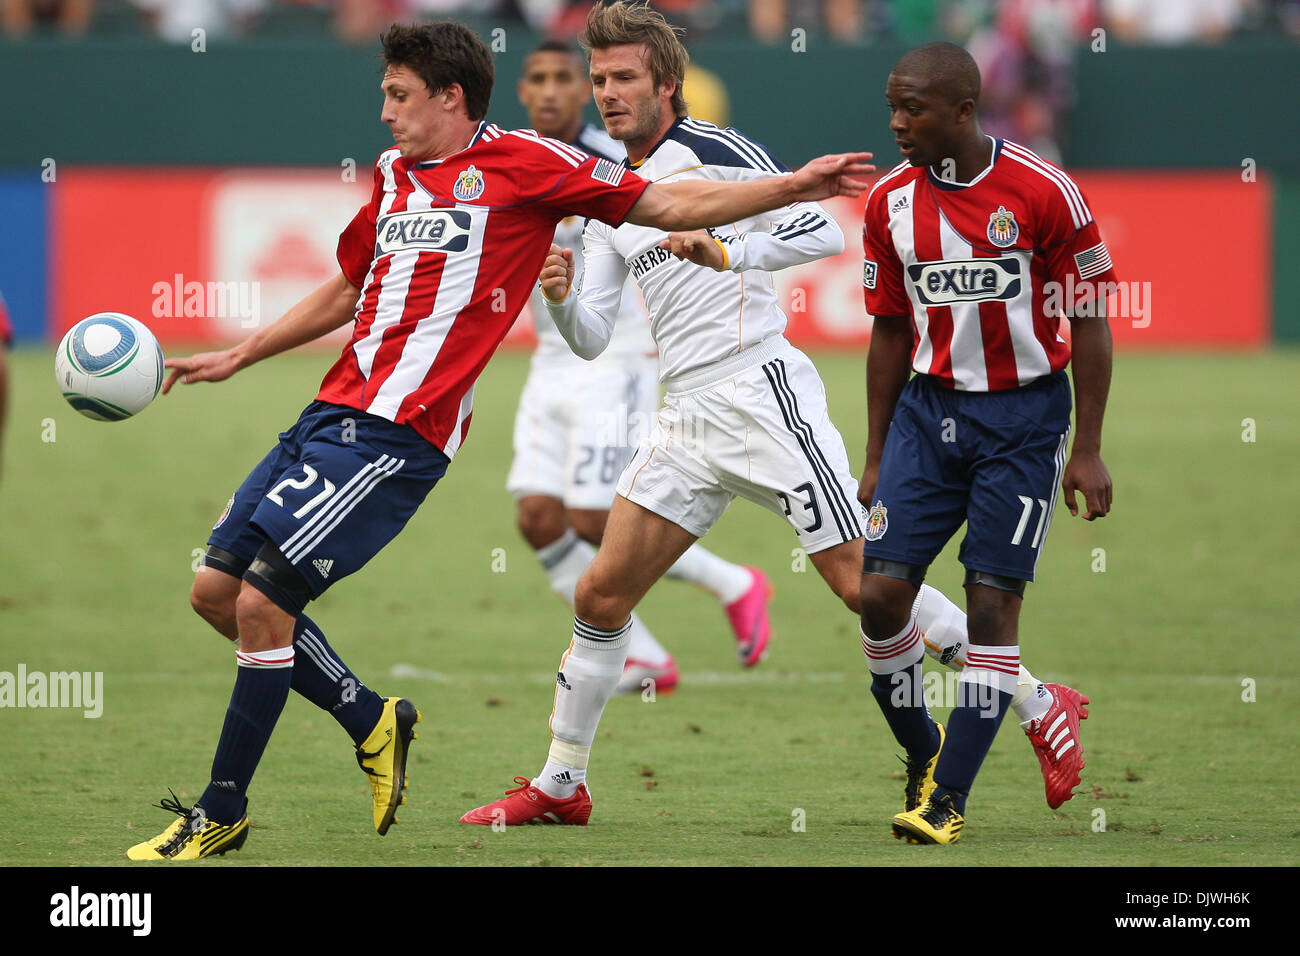 Oct. 3, 2010 - Carson, California, United States of America - Chivas USA midfielder Ben Zemanski #21 (L) controls the ball while holding off Los Angeles Galaxy midfielder David Beckham #23 (mid) and with support from Chivas USA midfielder Michael Lahoud #11 (R) during the Chivas USA vs Los Angeles Galaxy game at the Home Depot Center. The Galaxy went on to defeat Club Depotivo Chiv Stock Photo